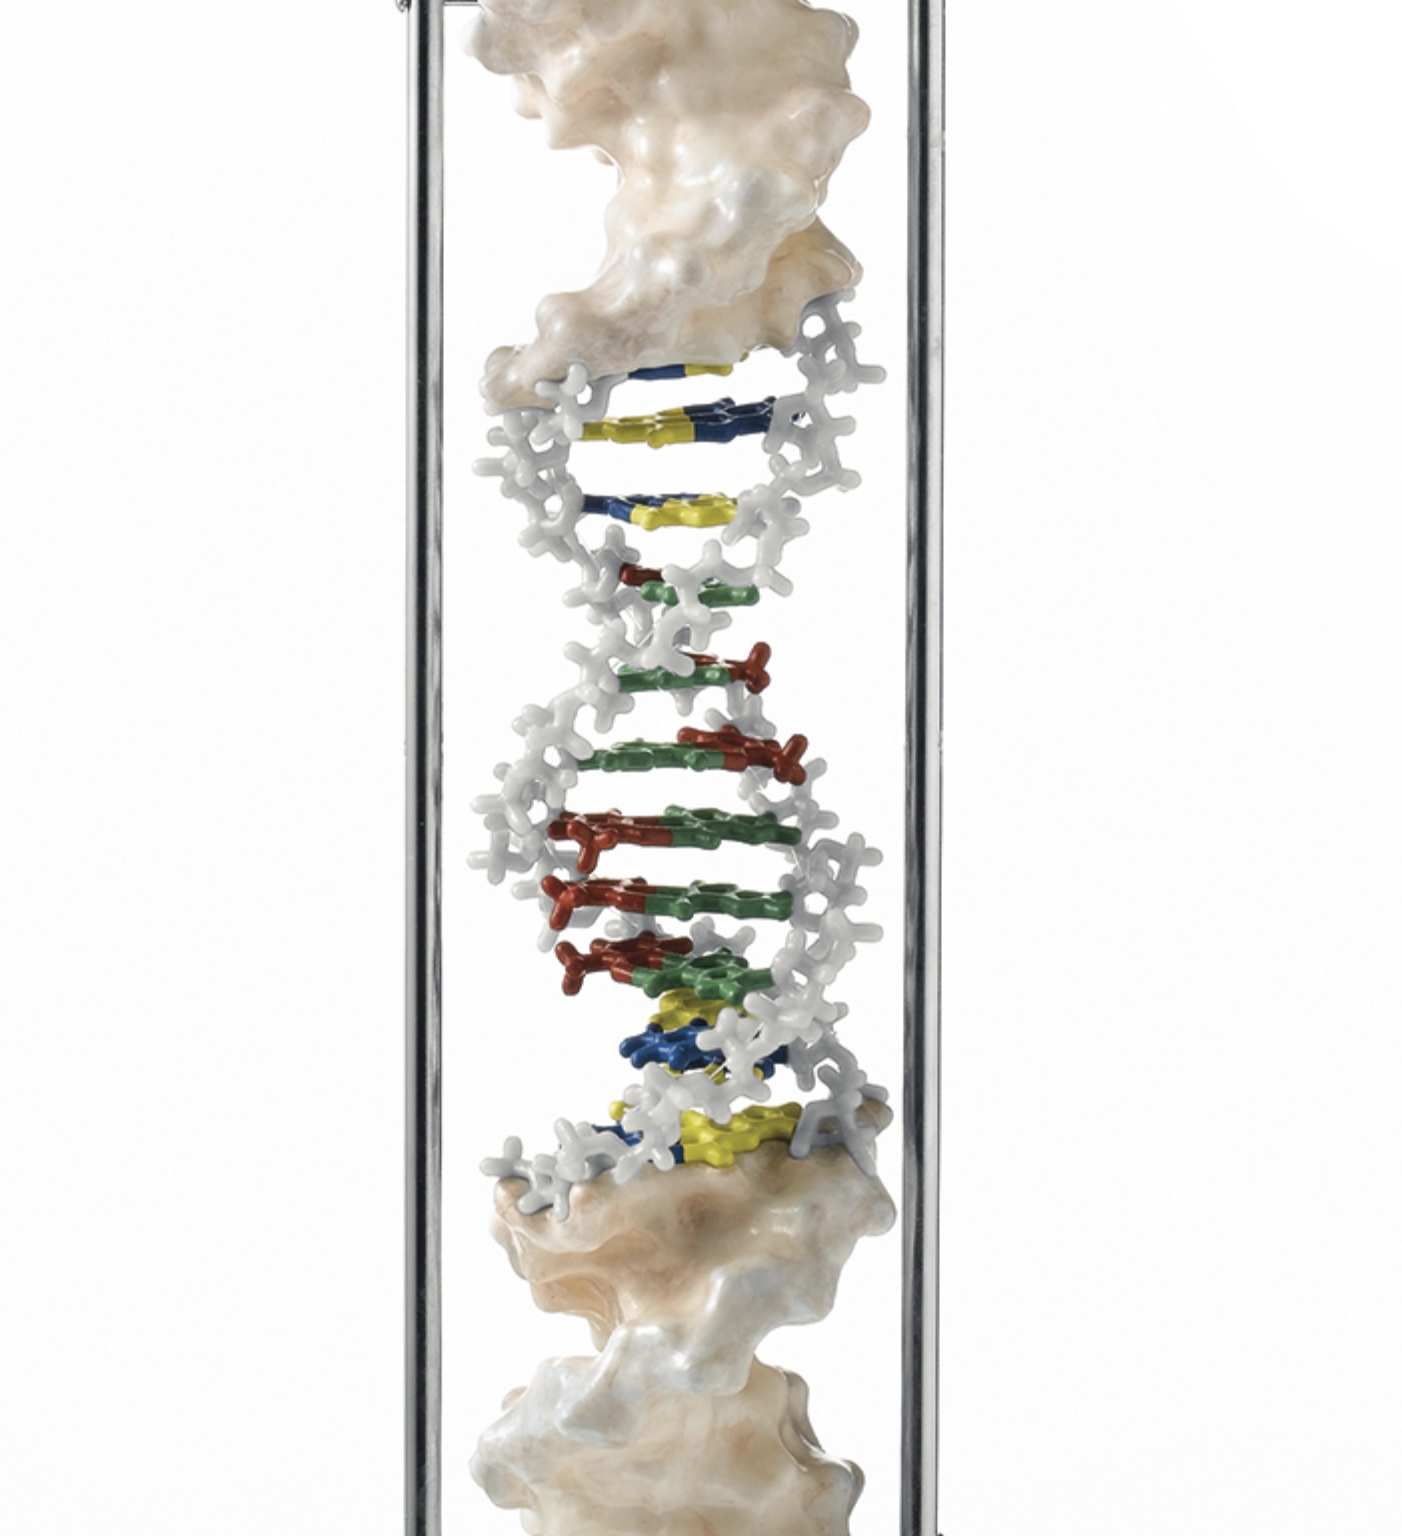 Exclusive and complete model of DNA presented on a rotating stand